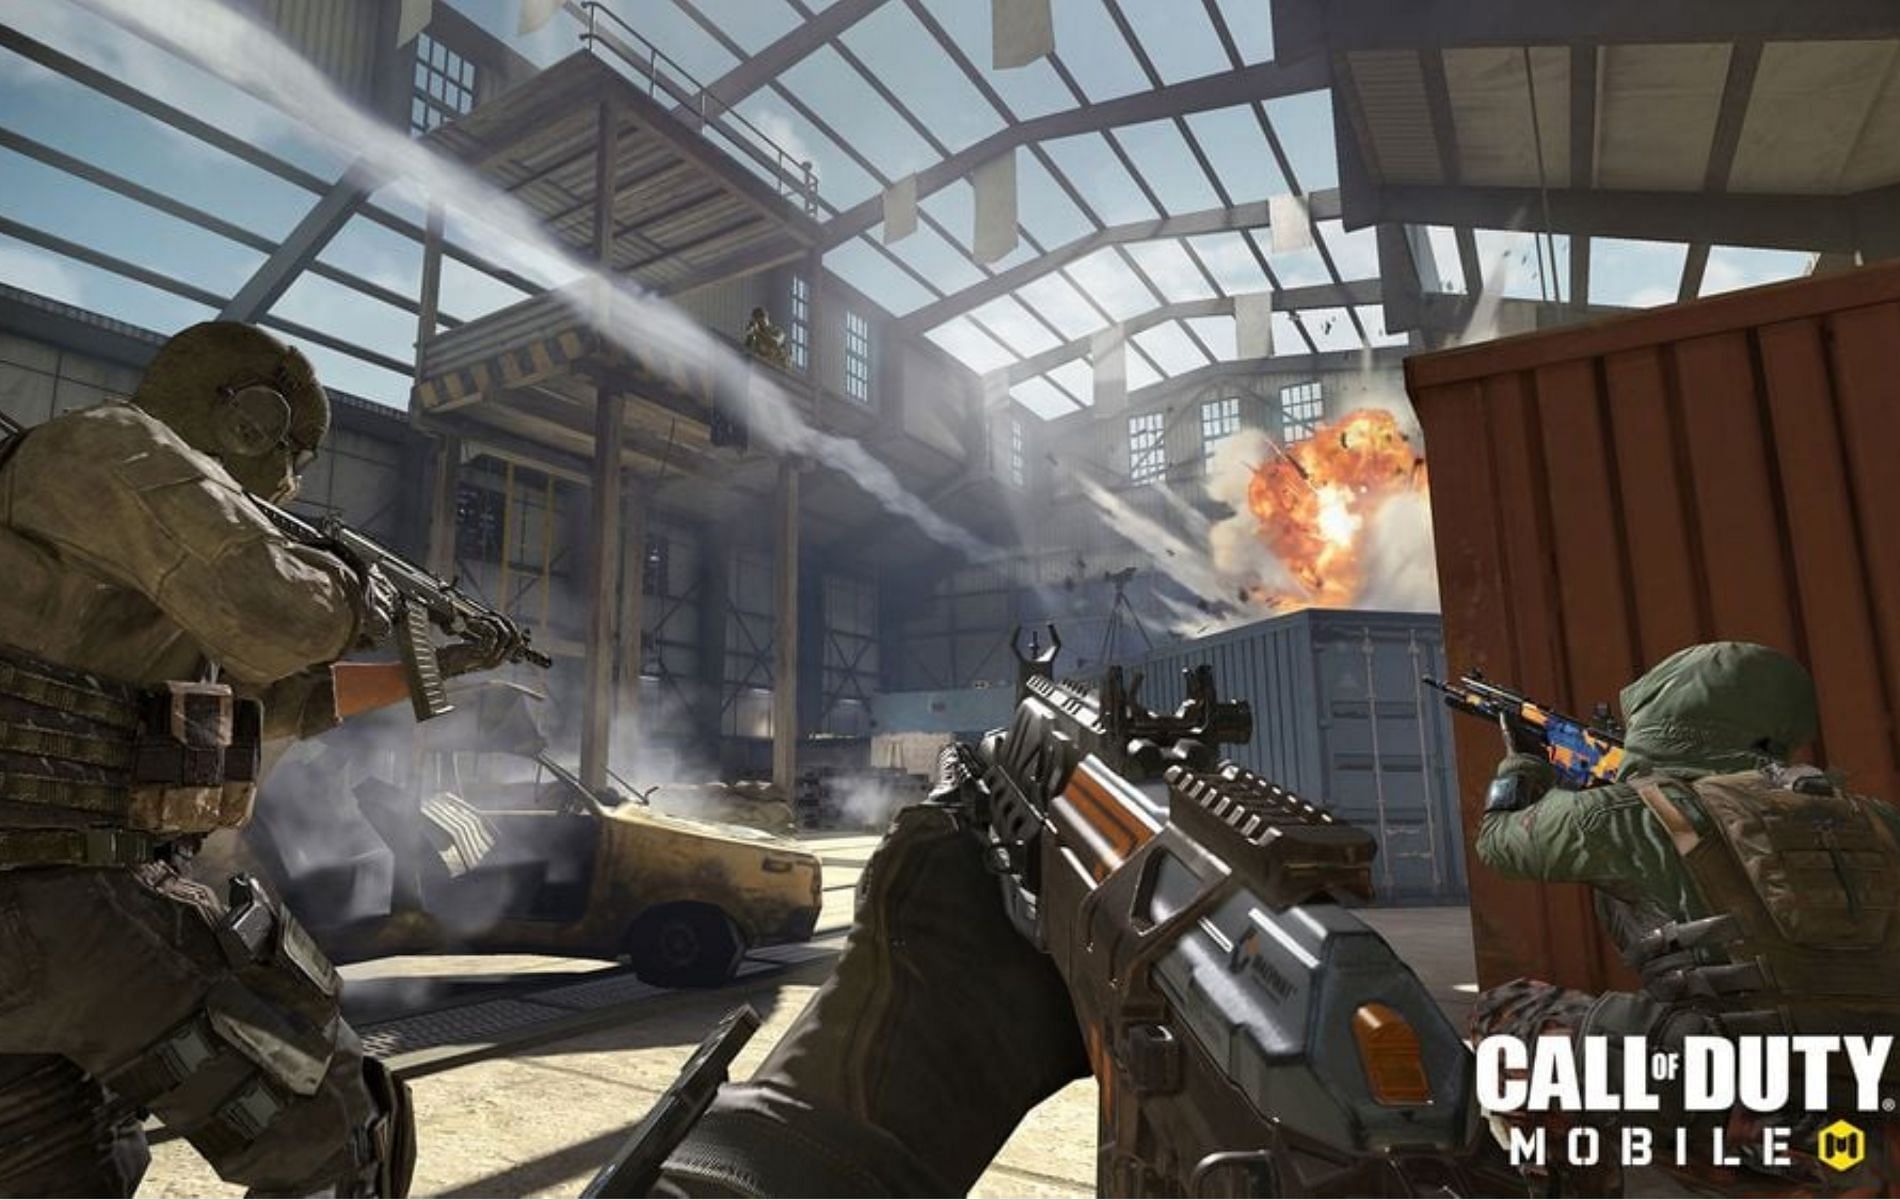 Call of Duty Mobile cheats, tips - Multiplayer and ranked tips for victory